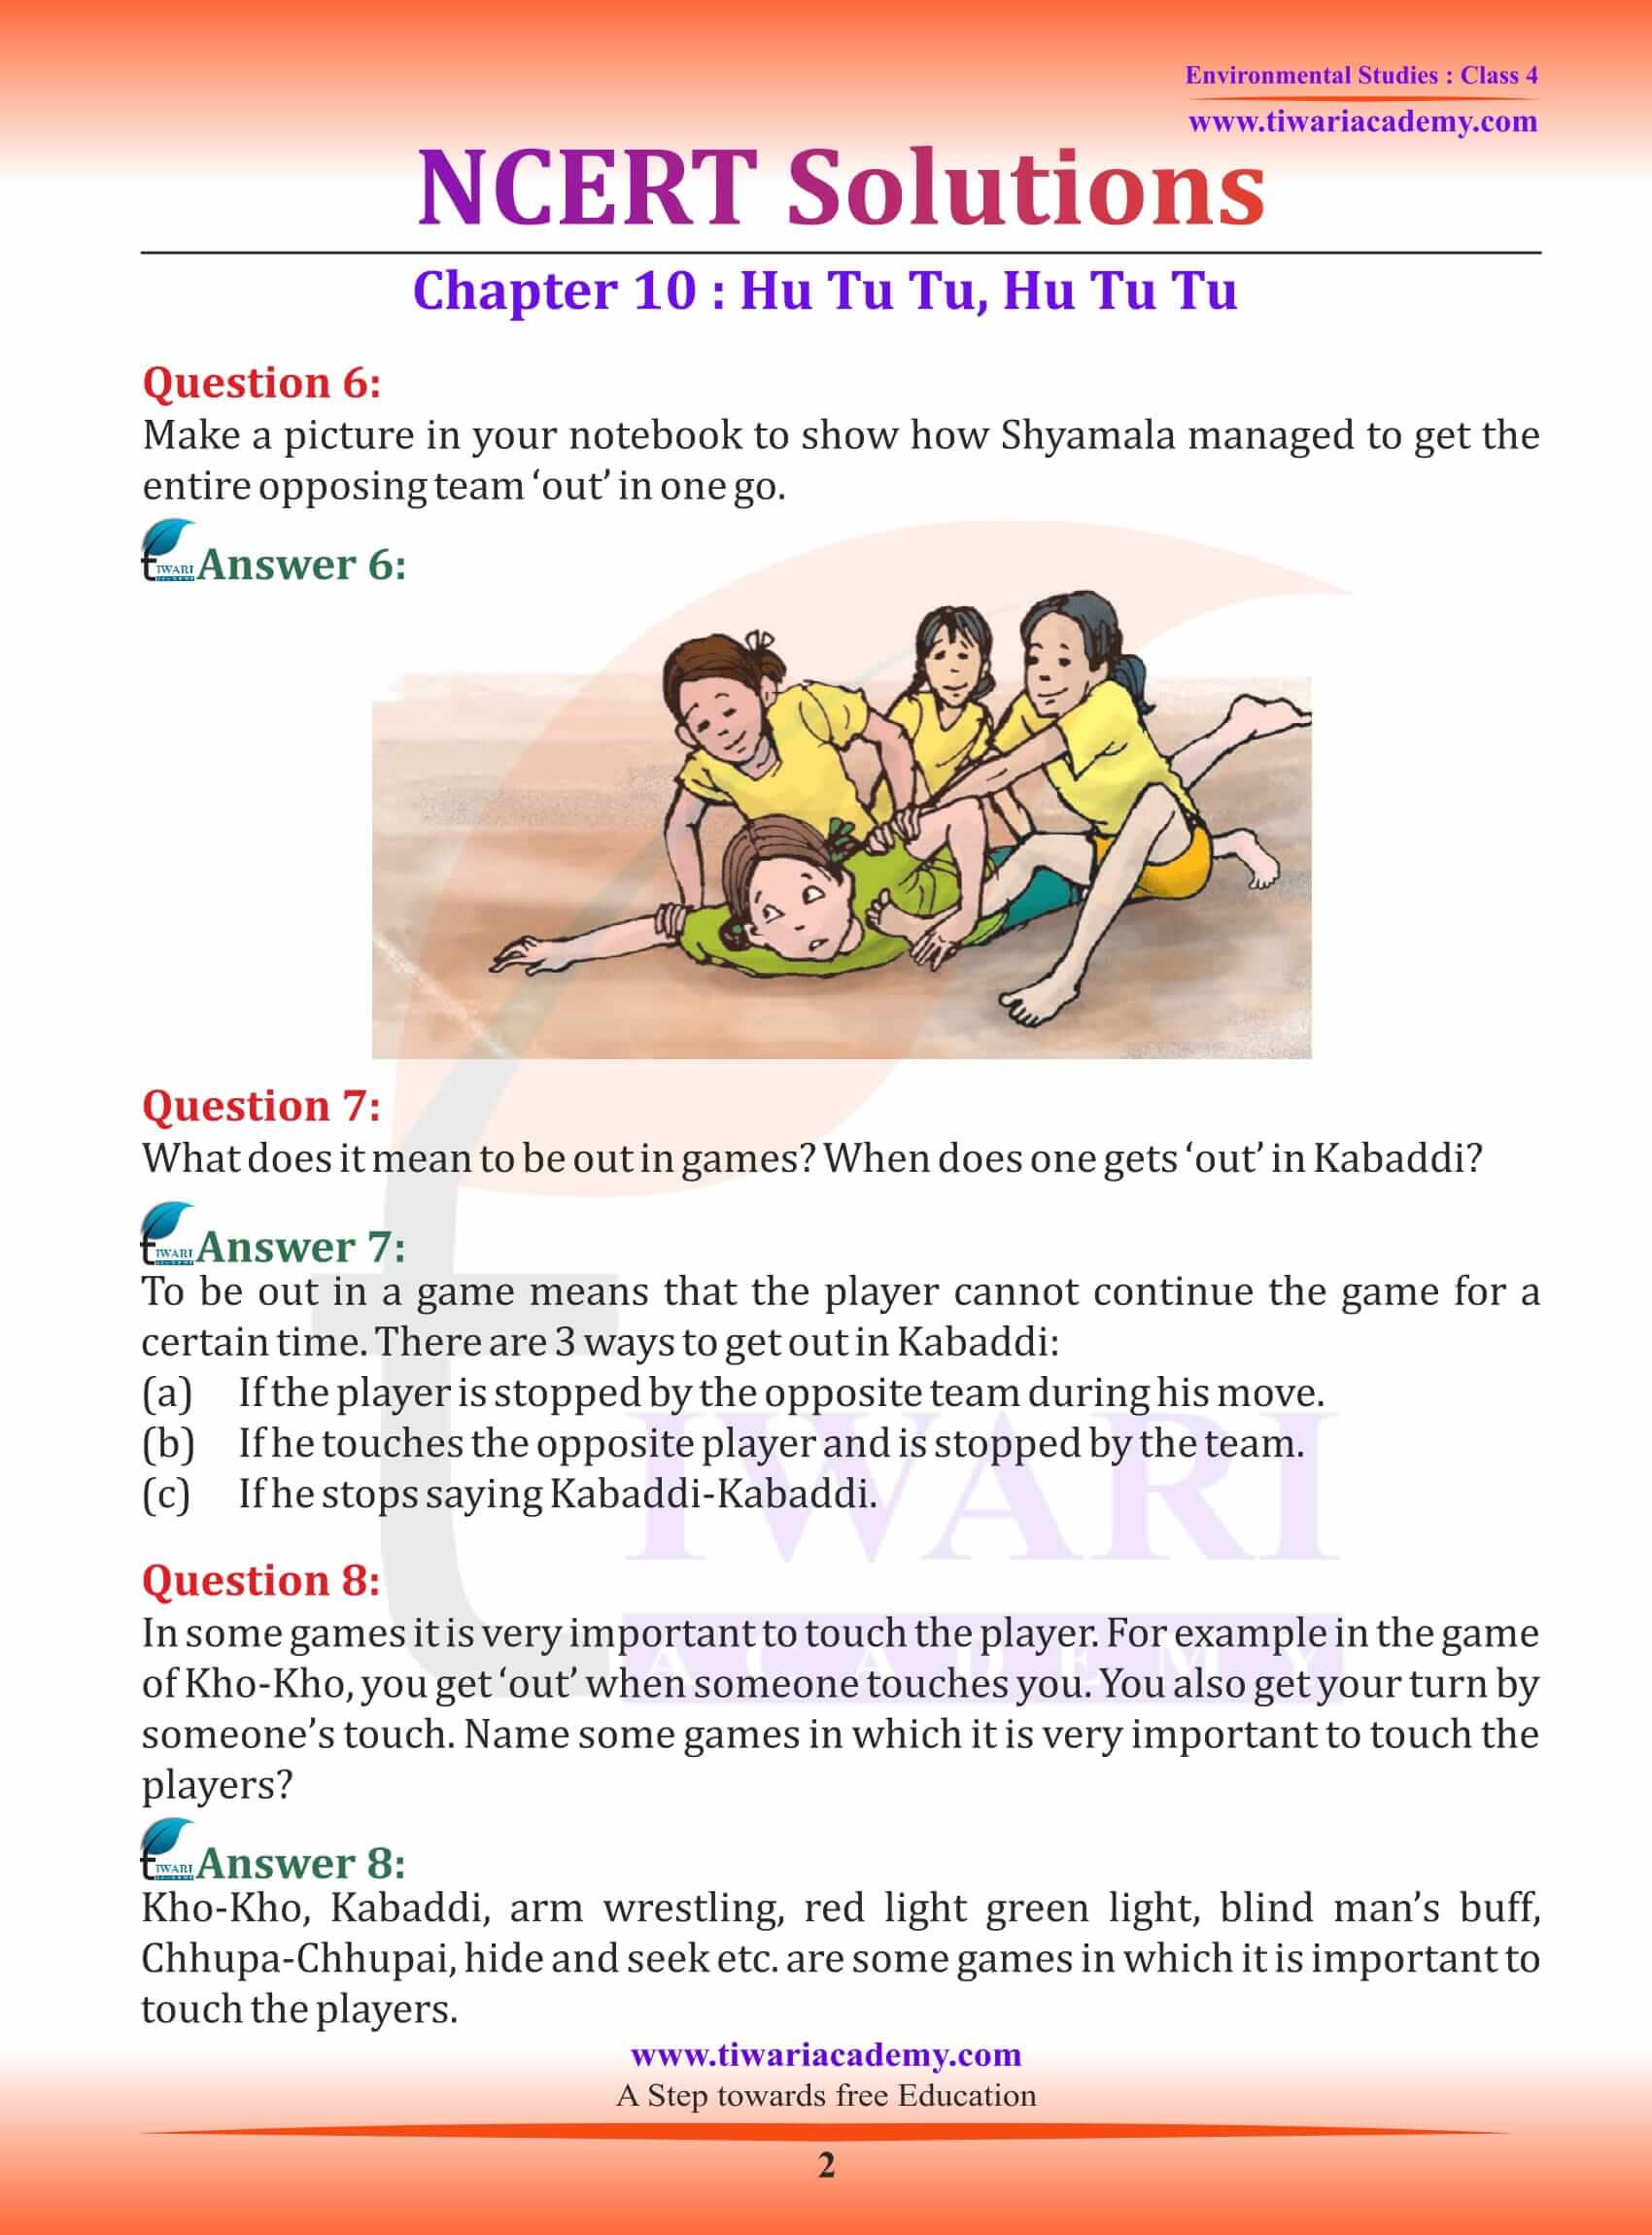 NCERT Solutions for Class 4 EVS Chapter 10